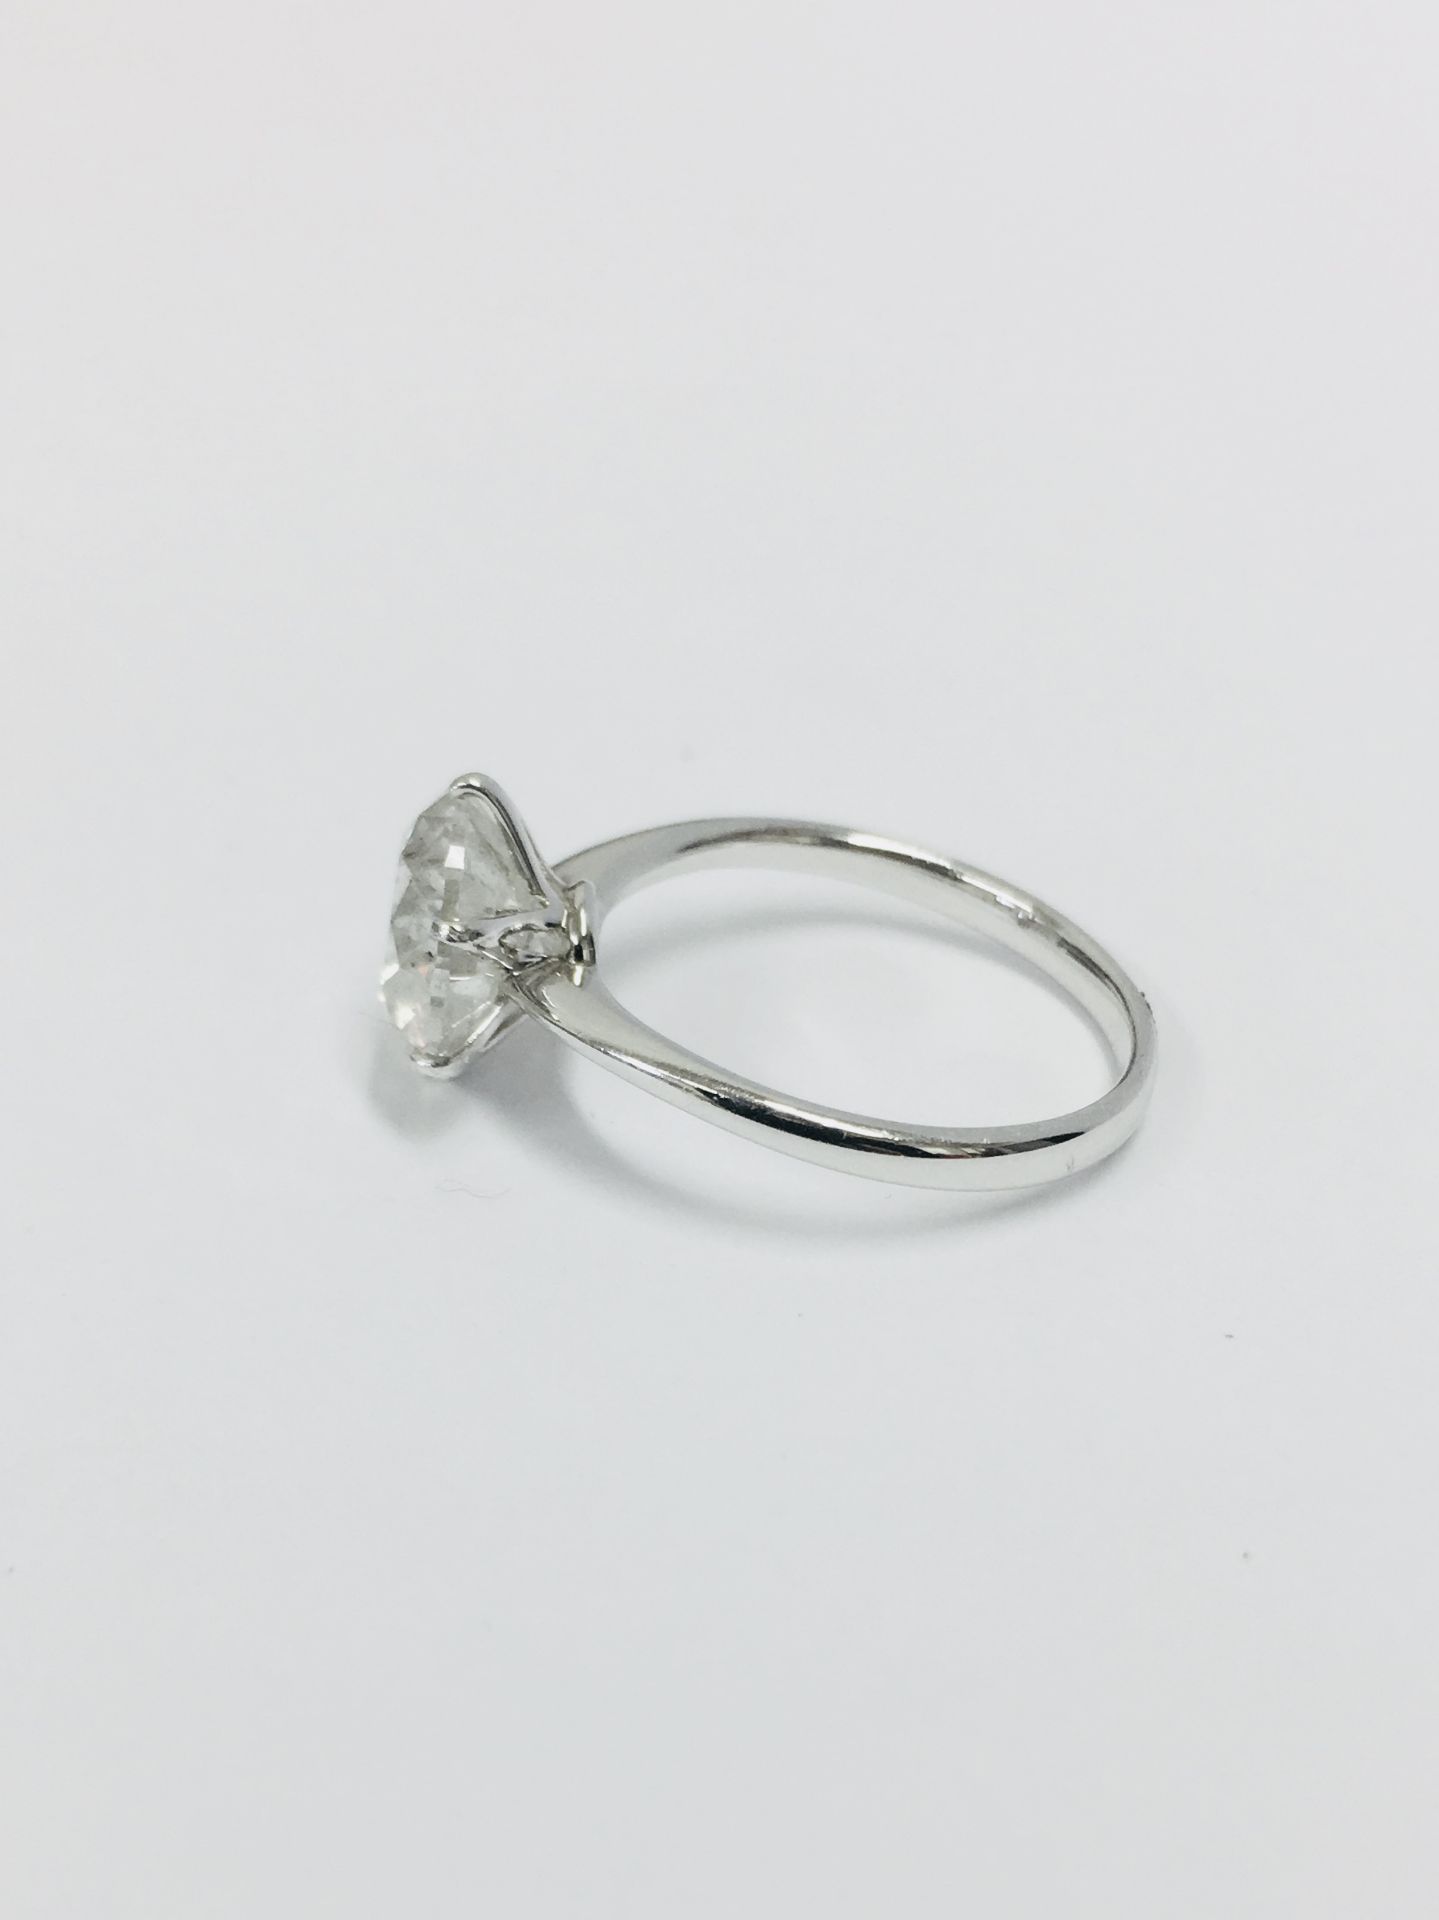 2.04ct diamond solitaire ring set in 18ct white gold. H colour and I1 clarity. High 4 claw - Image 2 of 3